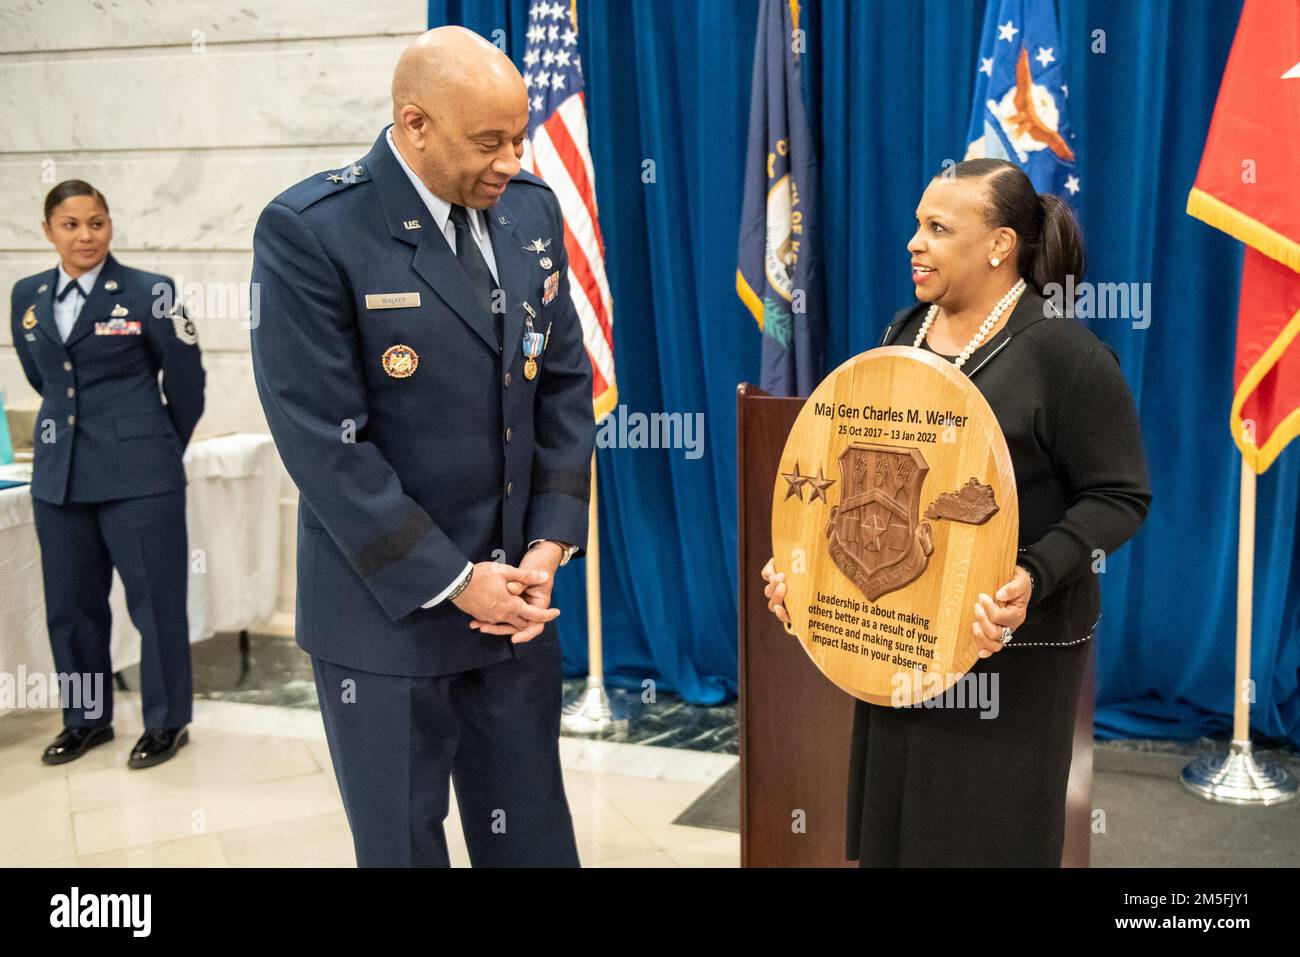 Sheila Lawson, state equal employment manager for the Kentucky National Guard, presents Maj. Gen. Charles M. Walker, director of the Office of Complex Investigations at the National Guard Bureau, with a token of appreciation during Walker’s promotion ceremony, held in the Capitol Rotunda in Frankfort, Ky., March 12, 2022. Walker previously served as chief of staff for the Kentucky Air National Guard. Stock Photo